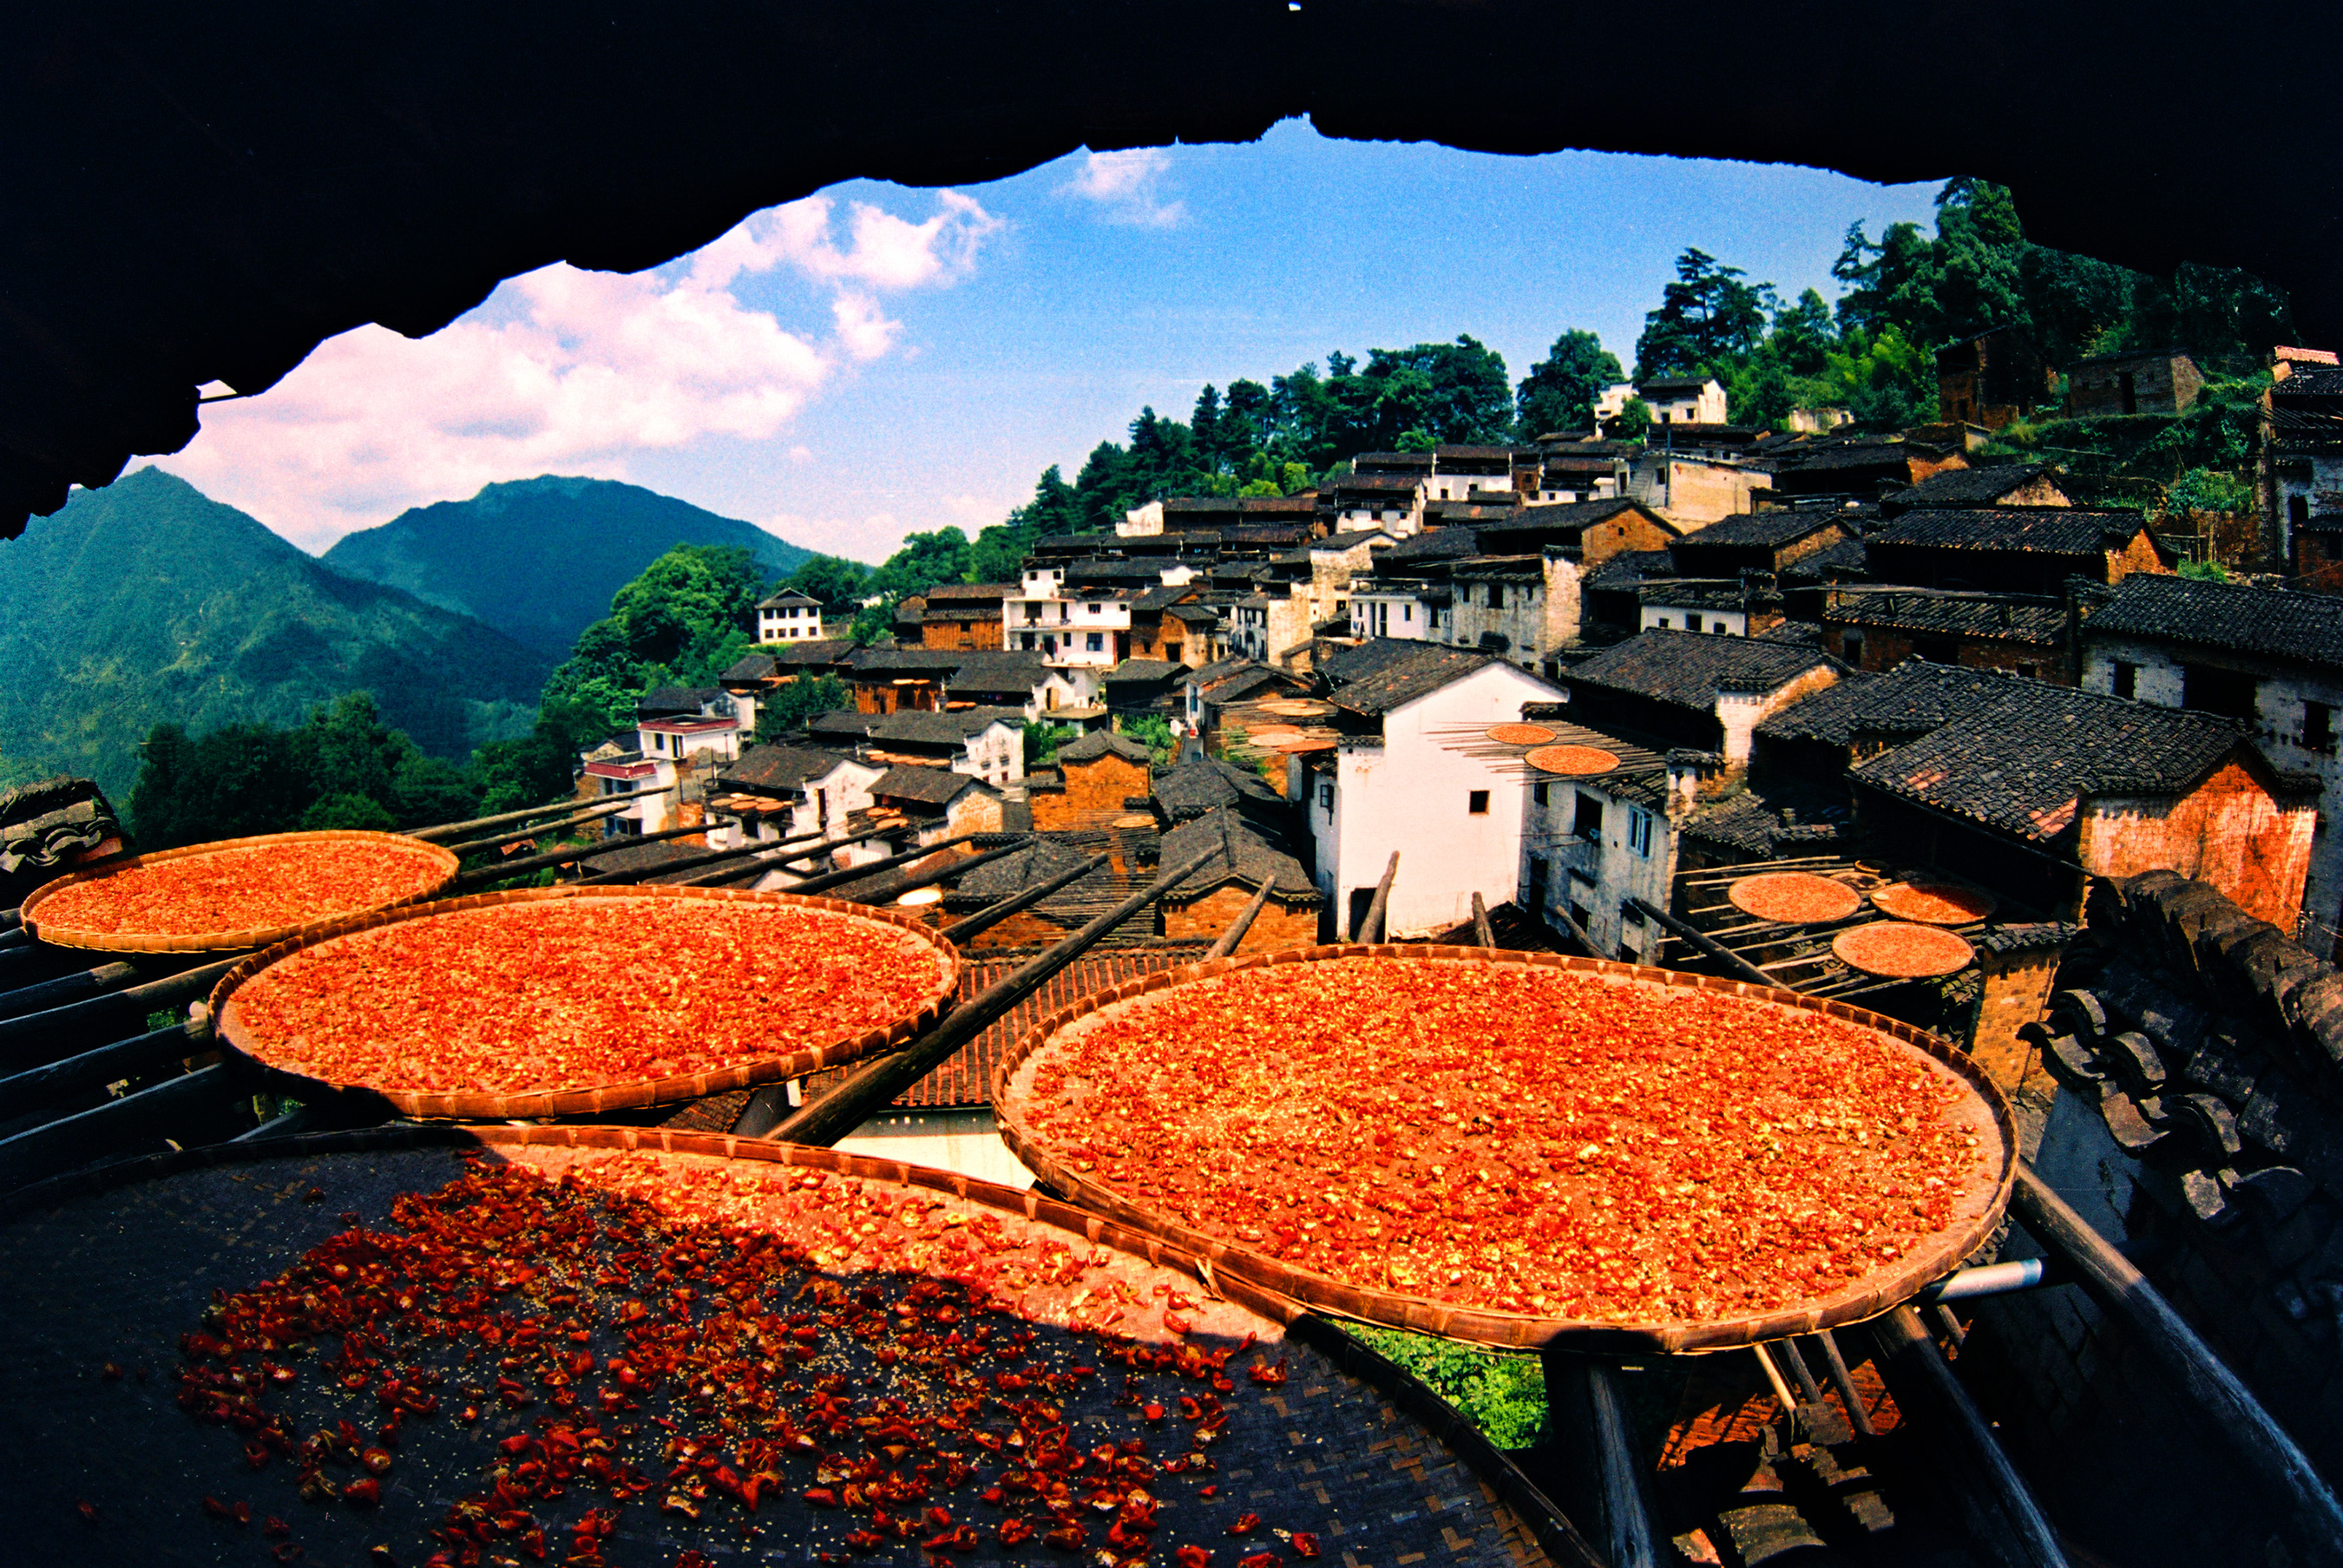 The unique view of shaiqiu can only be found in Huangling village where baskets of colorful harvest bask in the sunshine. (2)